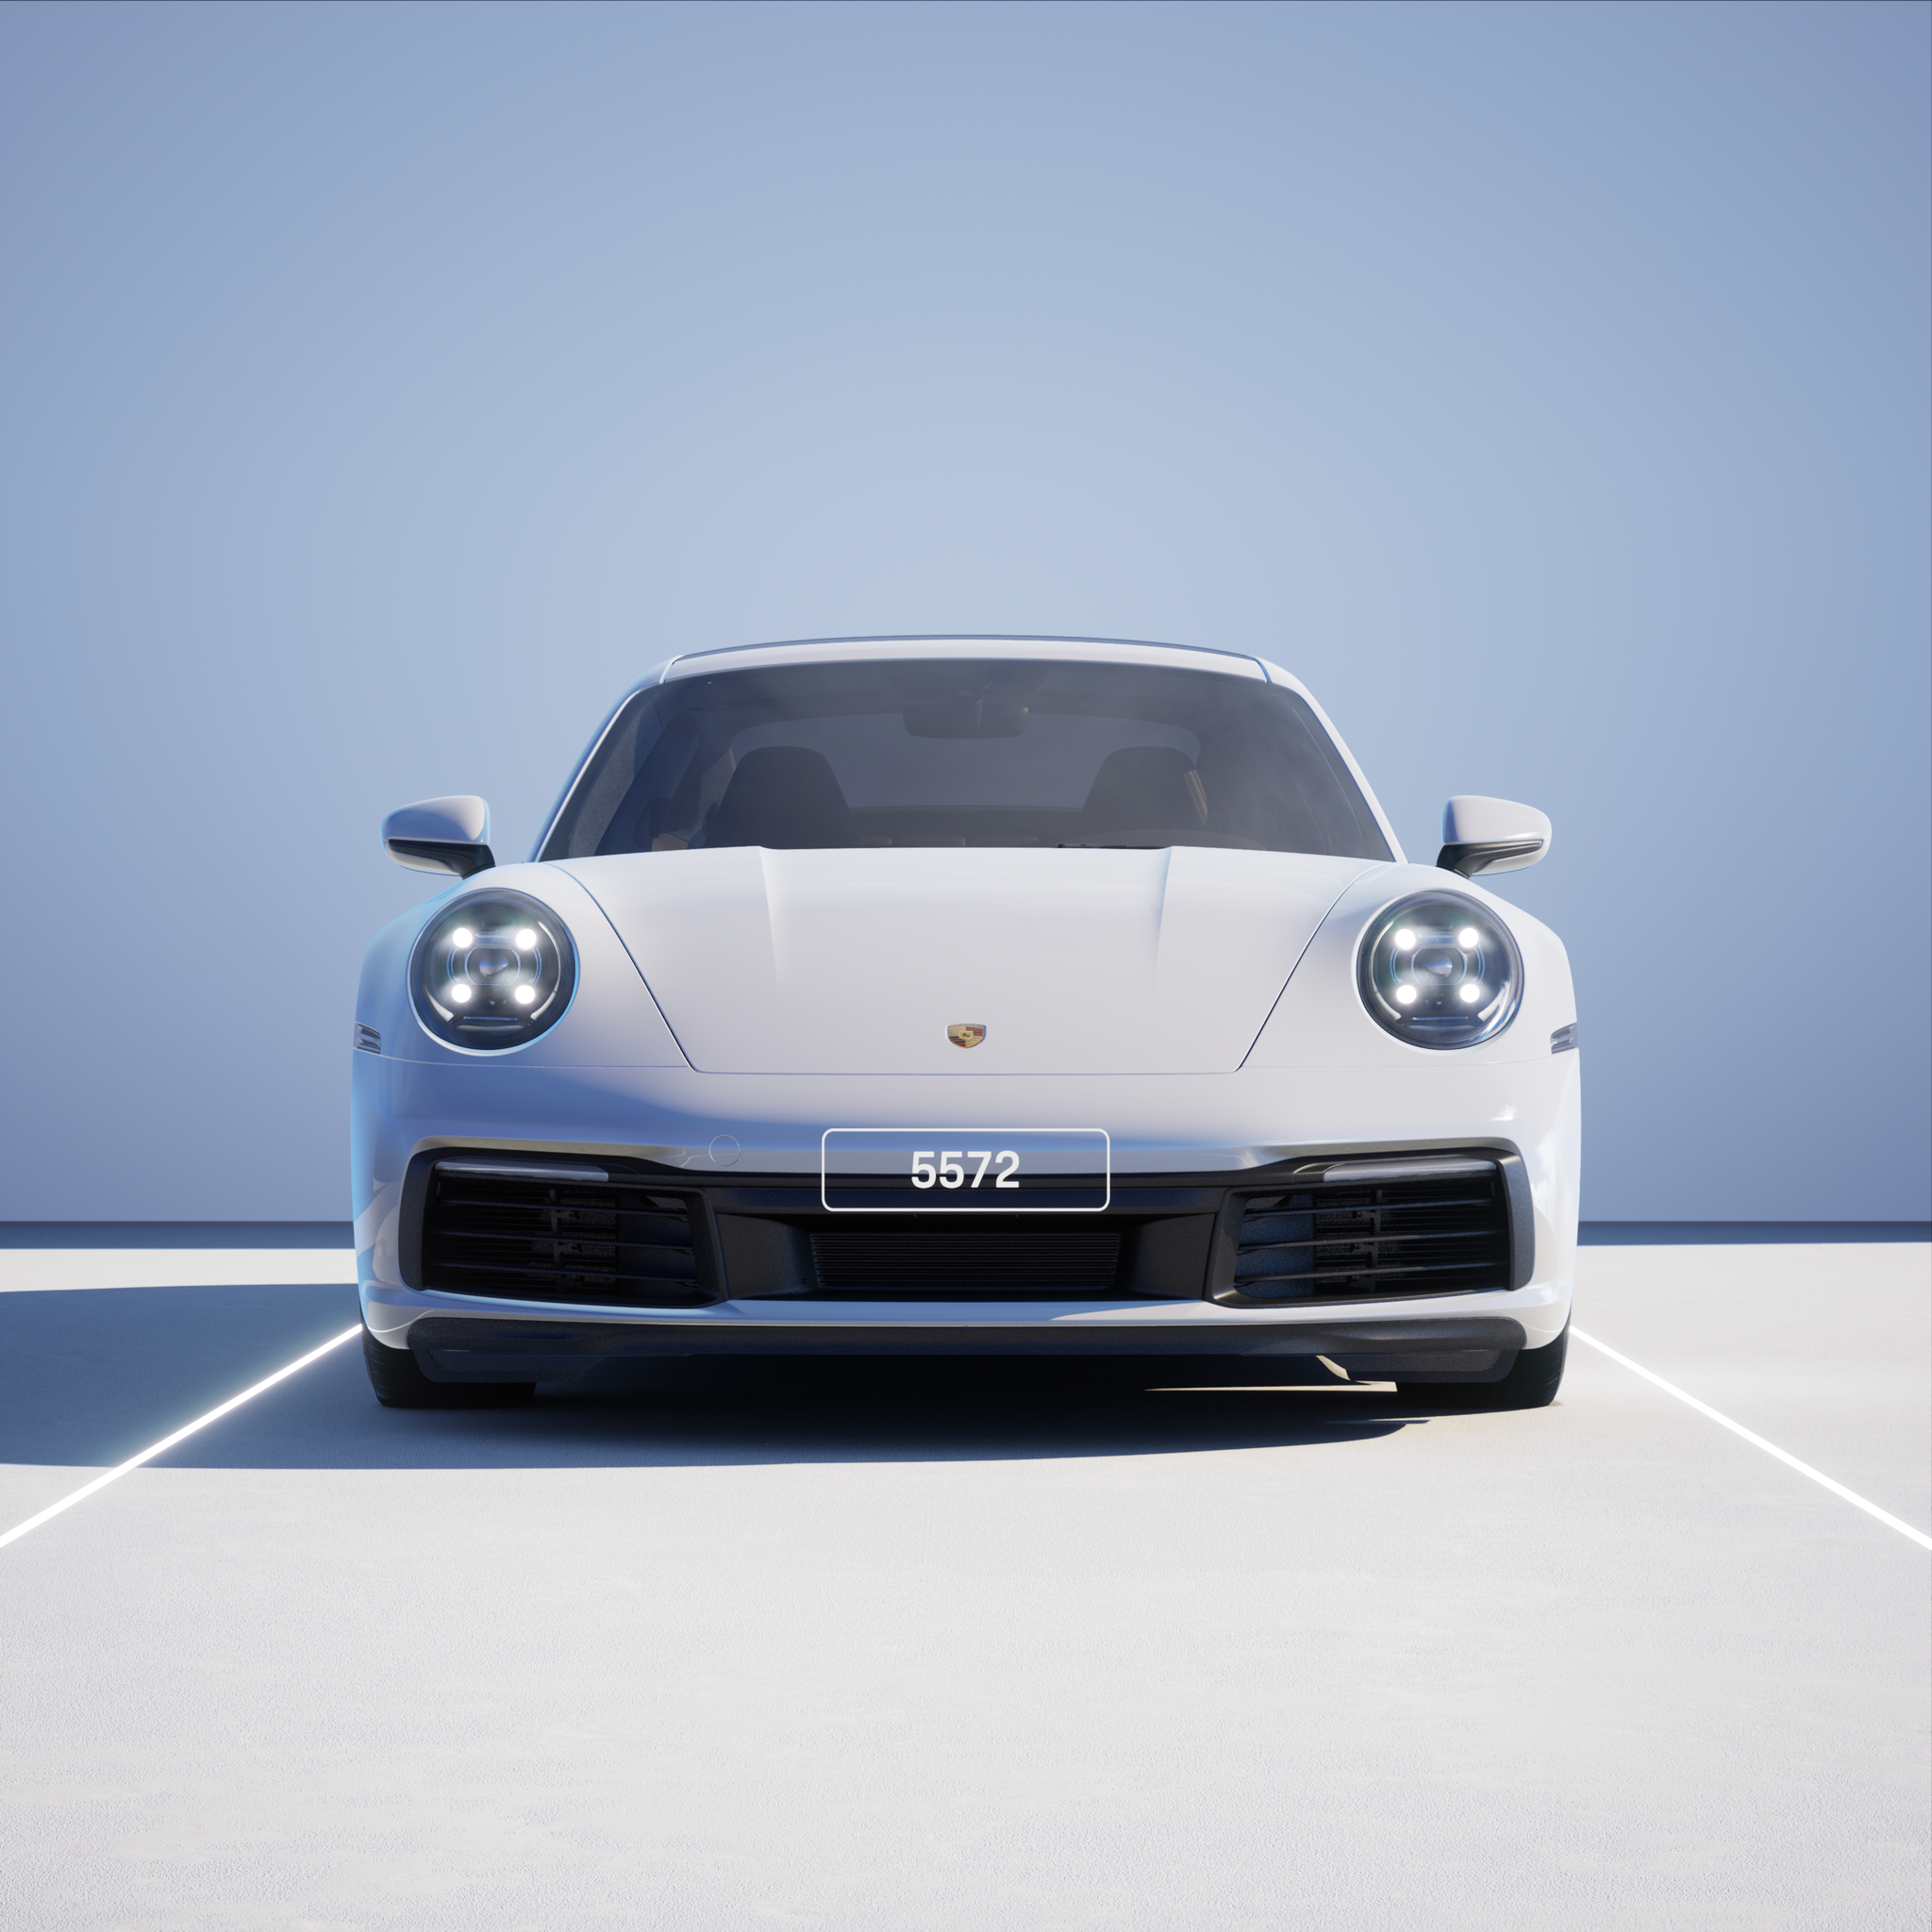 The PORSCHΞ 911 5572 image in phase